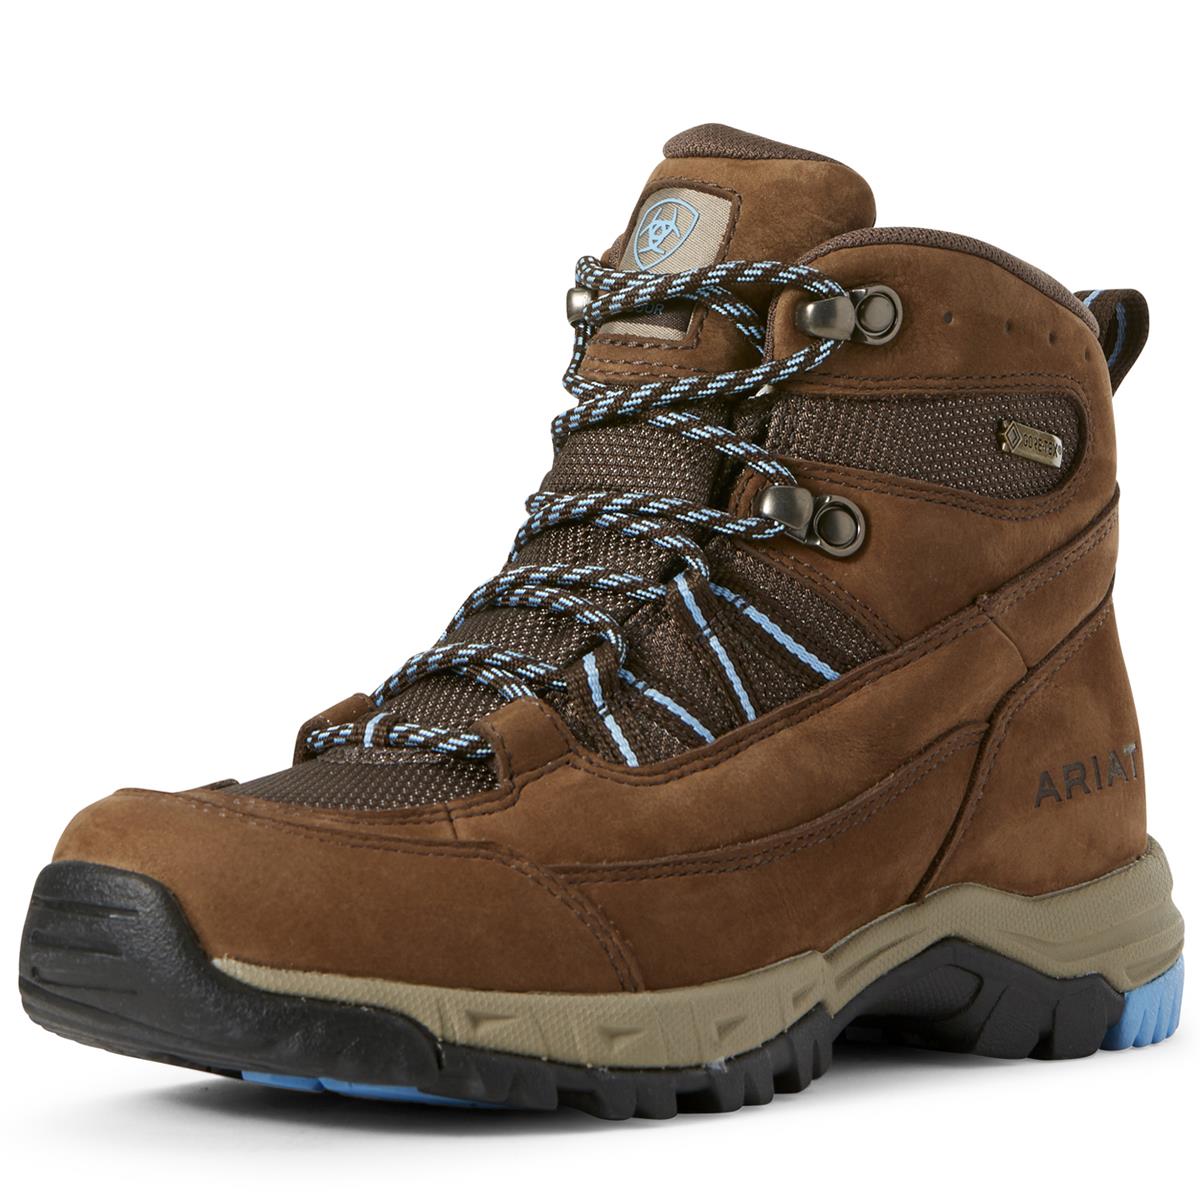 Ariat Womens Skyline Summit GORE-TEX Waterproof Boots Questions & Answers